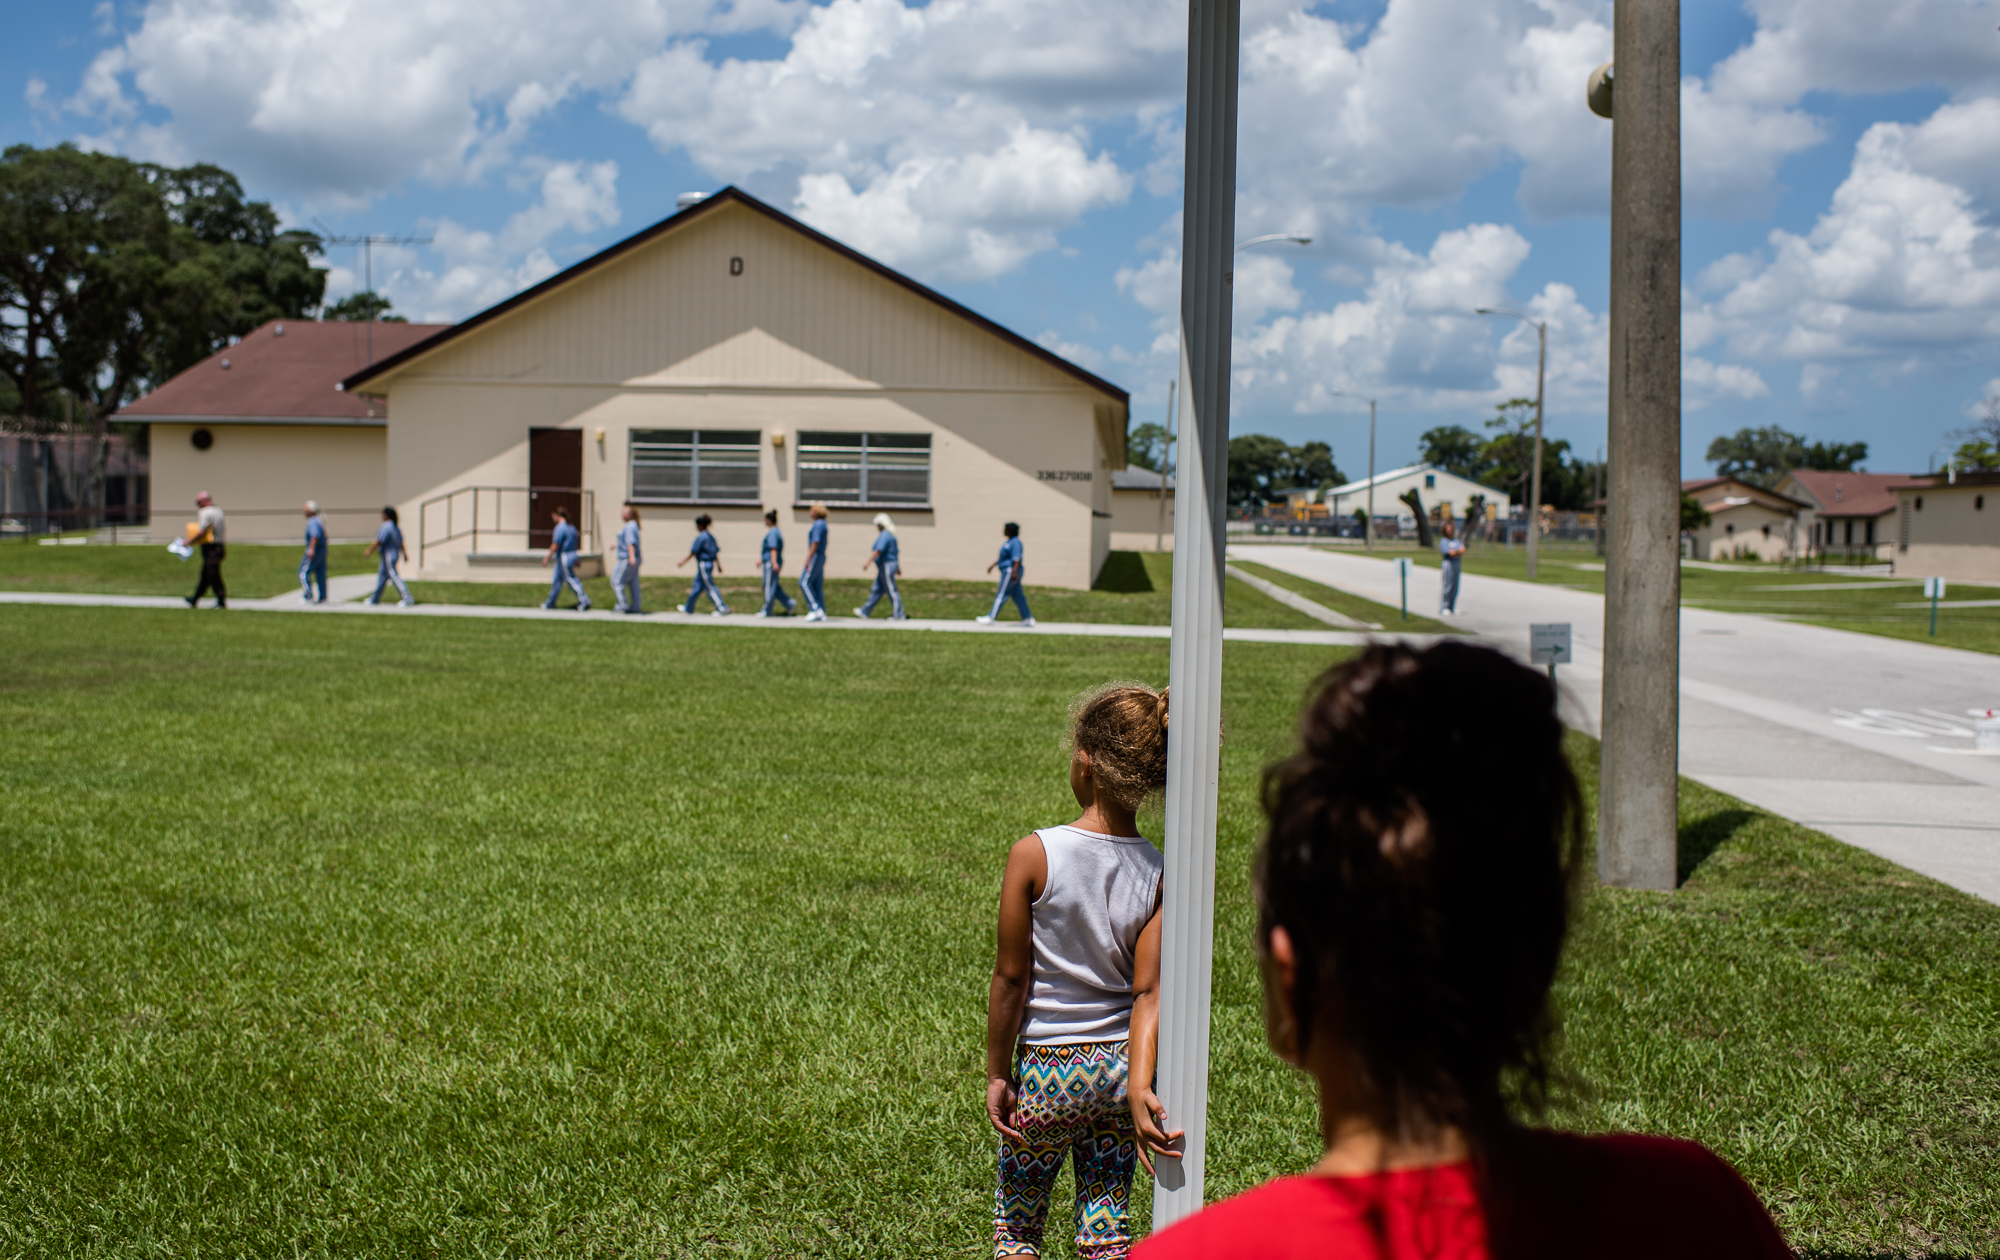  A girl watches a line of incarcerated women walk towards their housing unit at the Hernando Correctional Institution in Brooksville, Florida. 